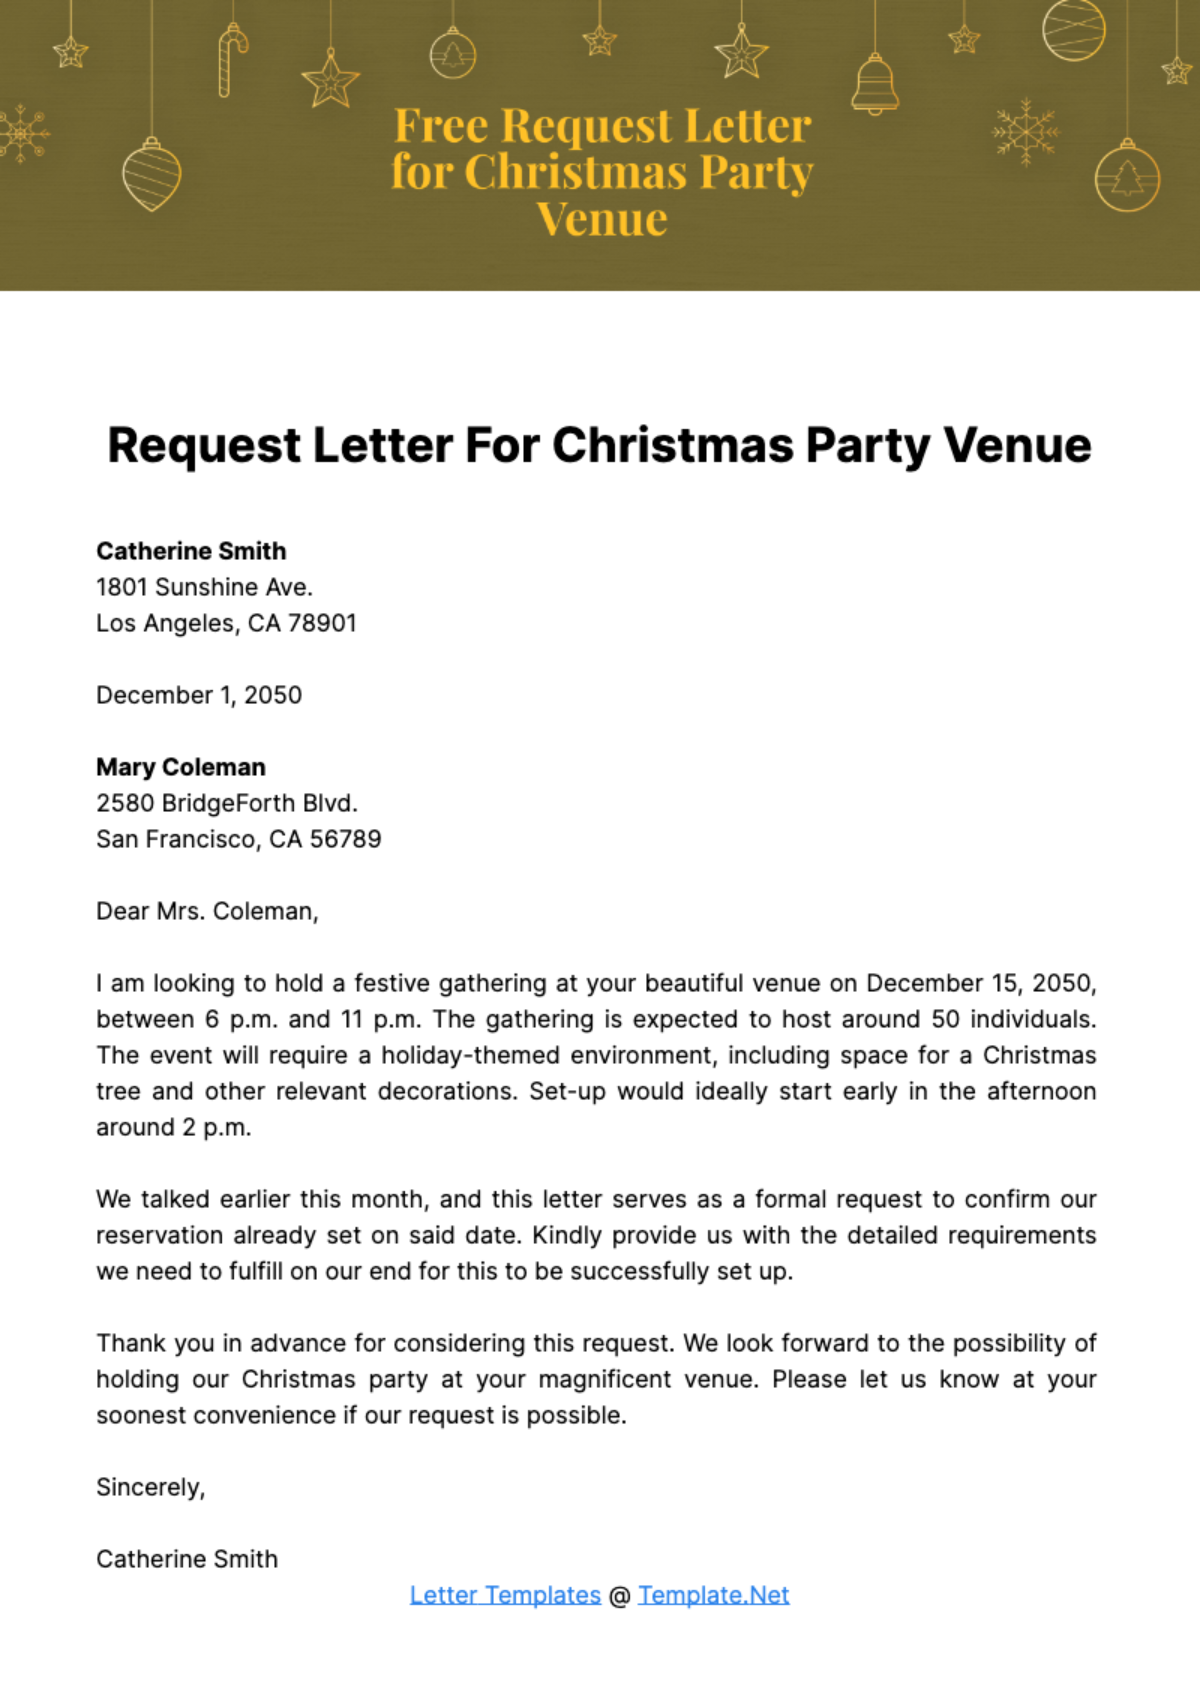 Free Request Letter for Christmas Party Venue Template